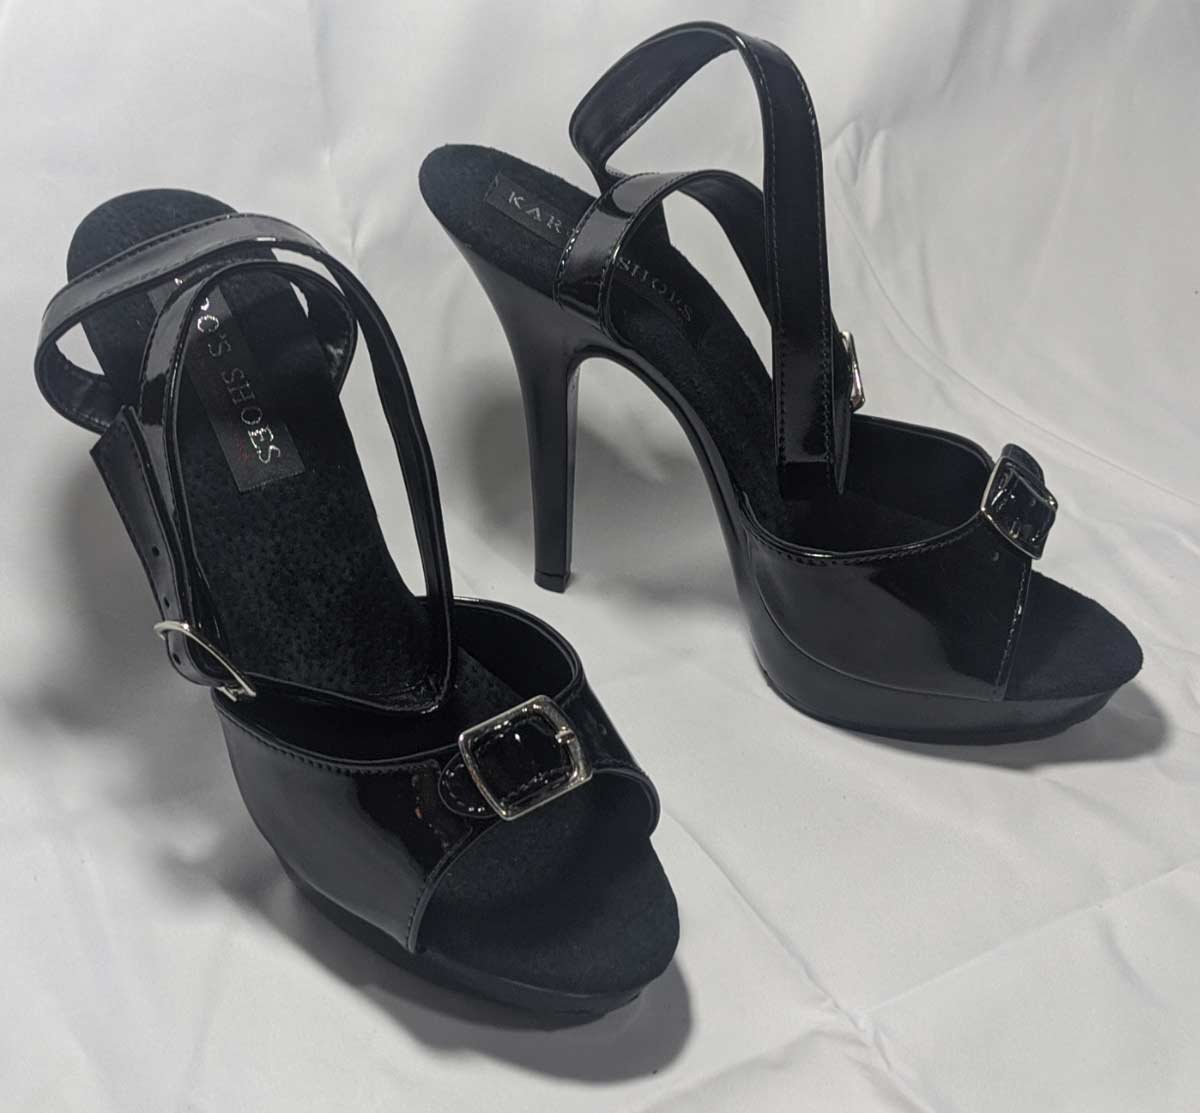 Karo Shoes 0034 Black Patent on Black SPECIAL in Specials - $145.99